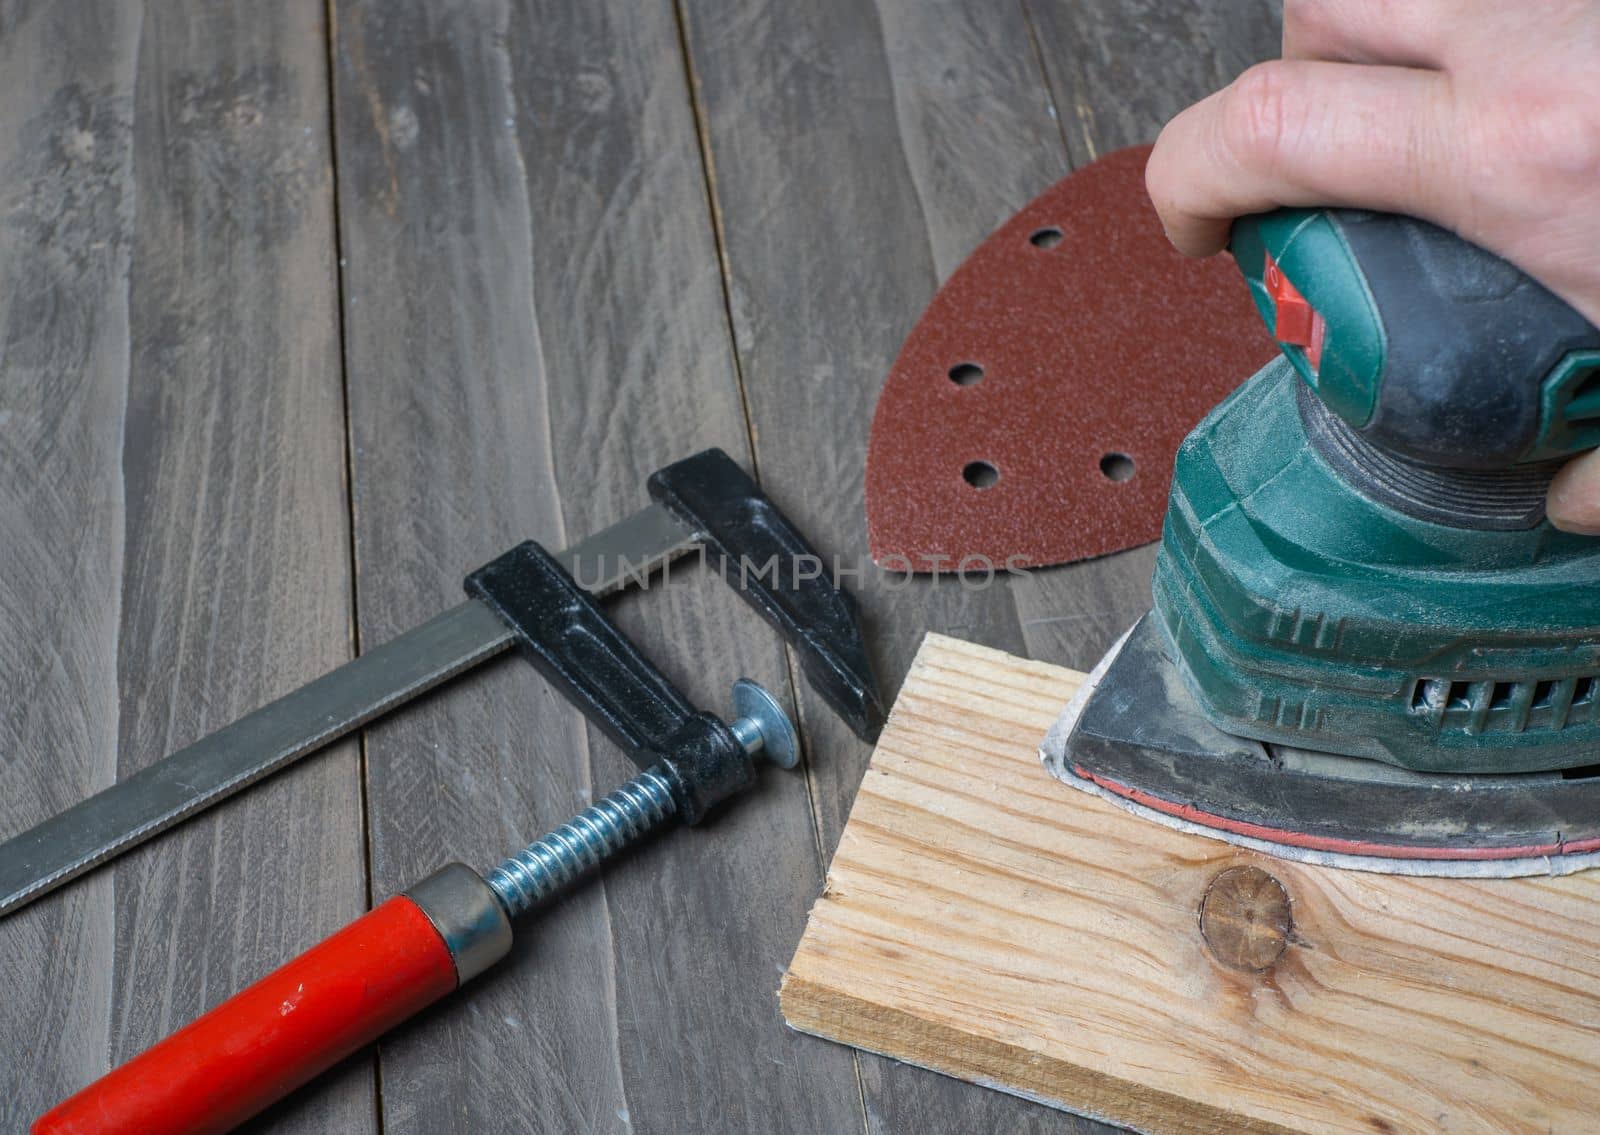 tools used for DIY at home by joseantona